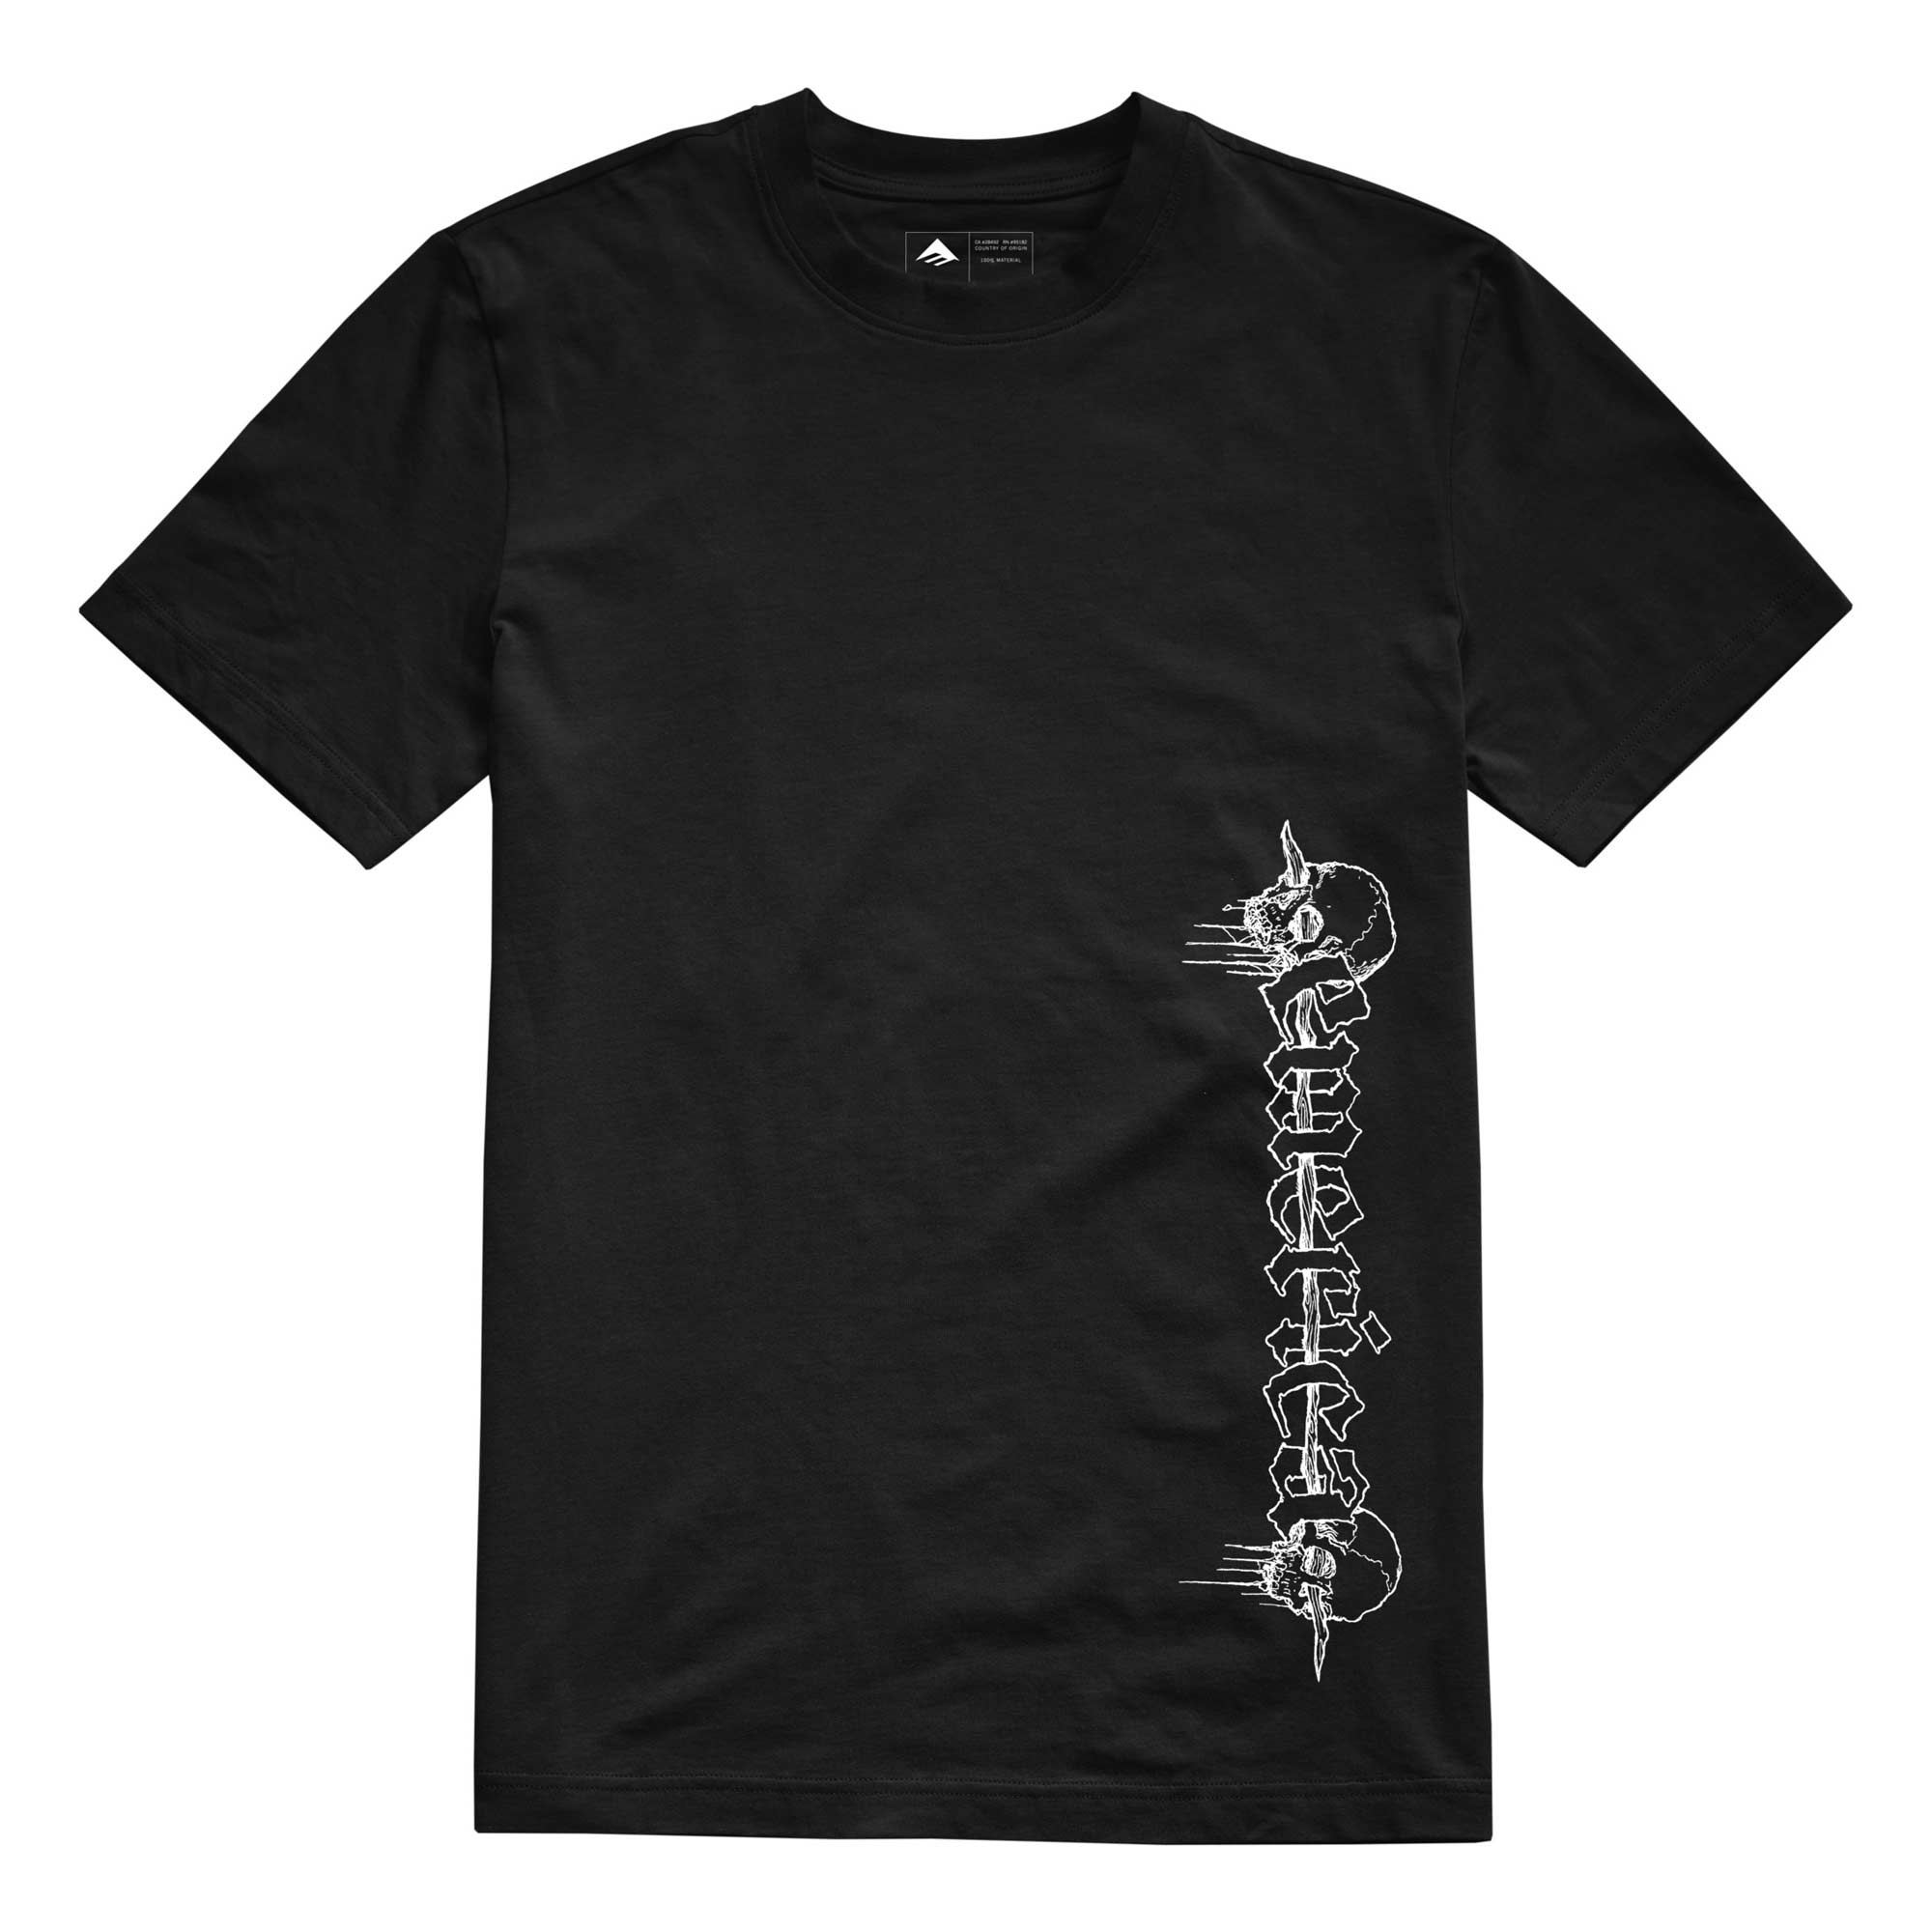 EMERICA T-Shirt SPIKED S/S black